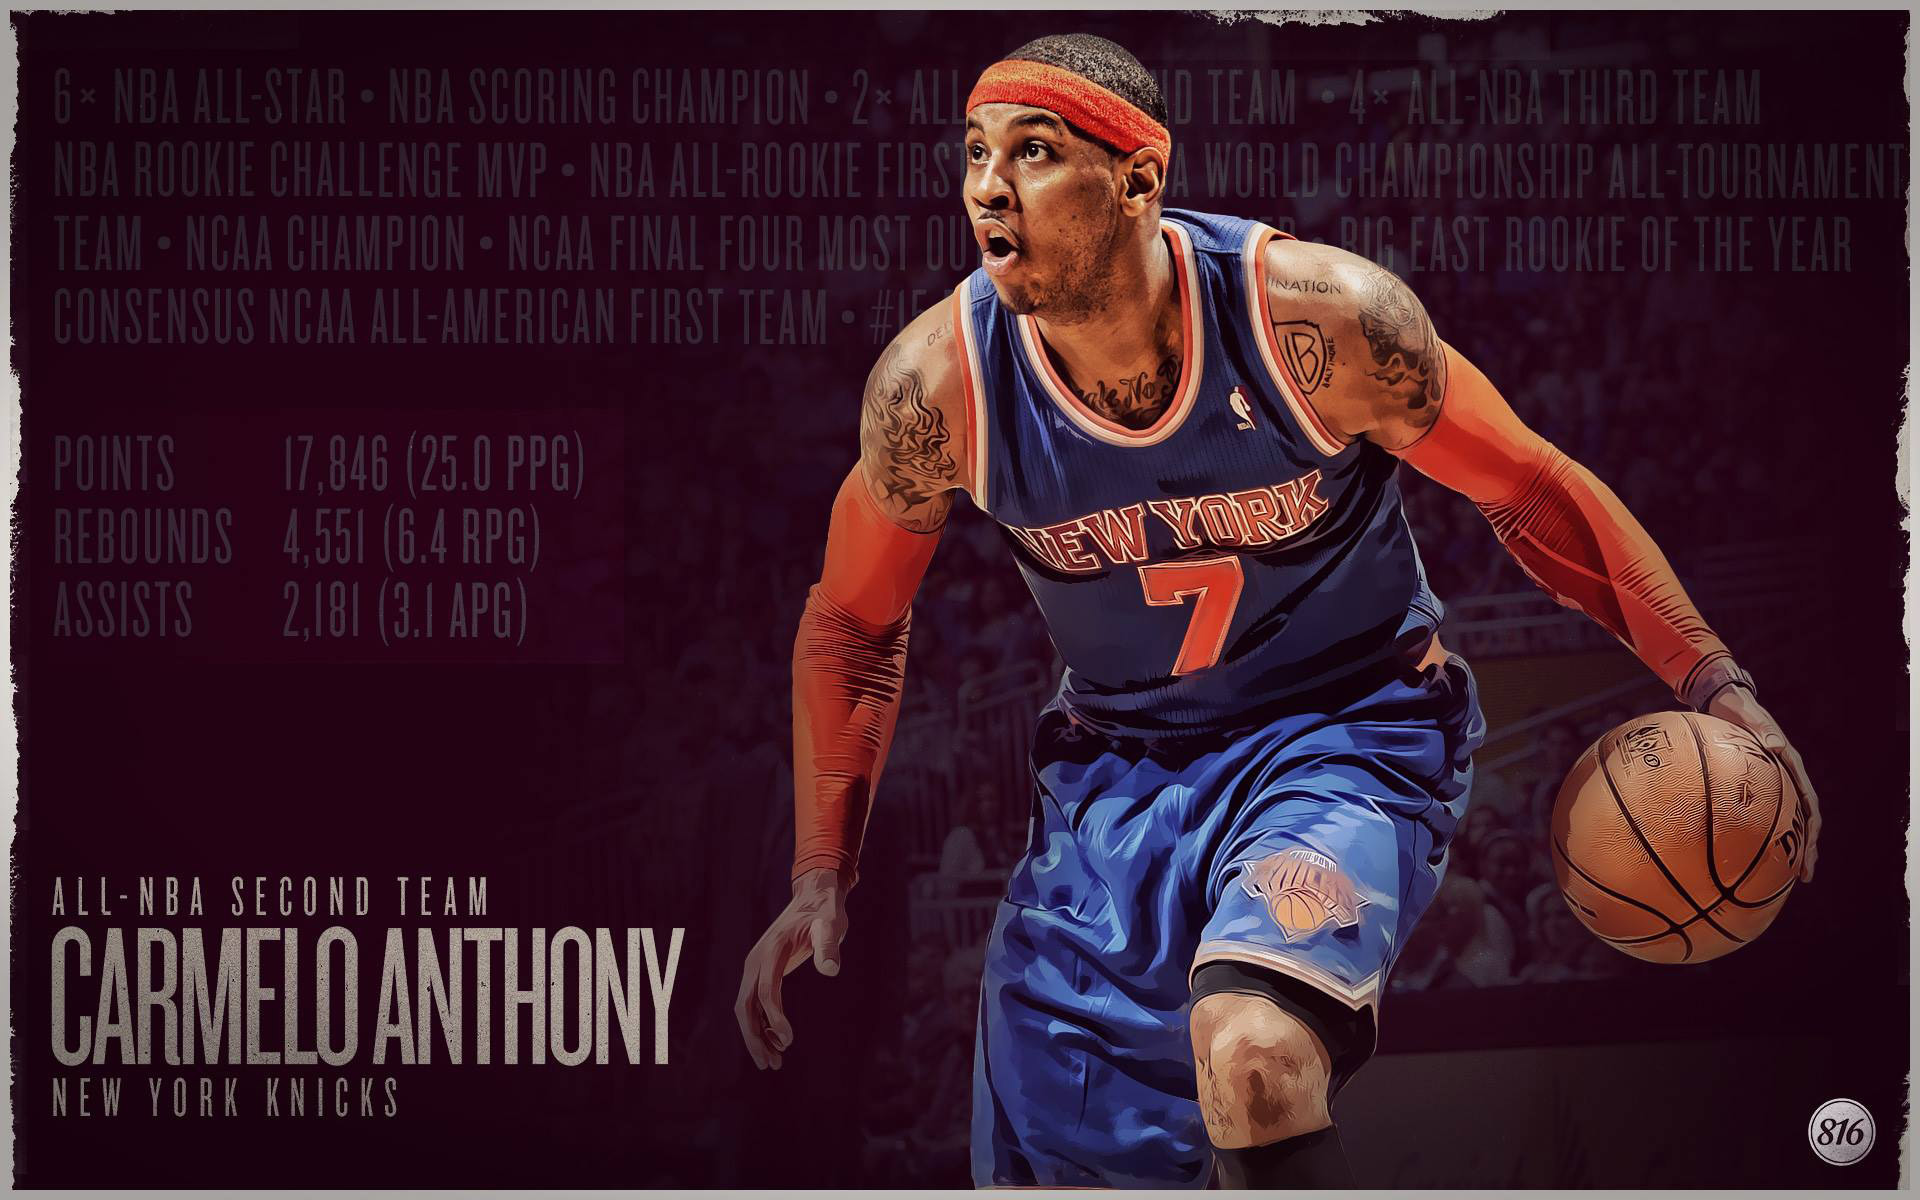 Carmelo Anthony Wallpaper HD Image